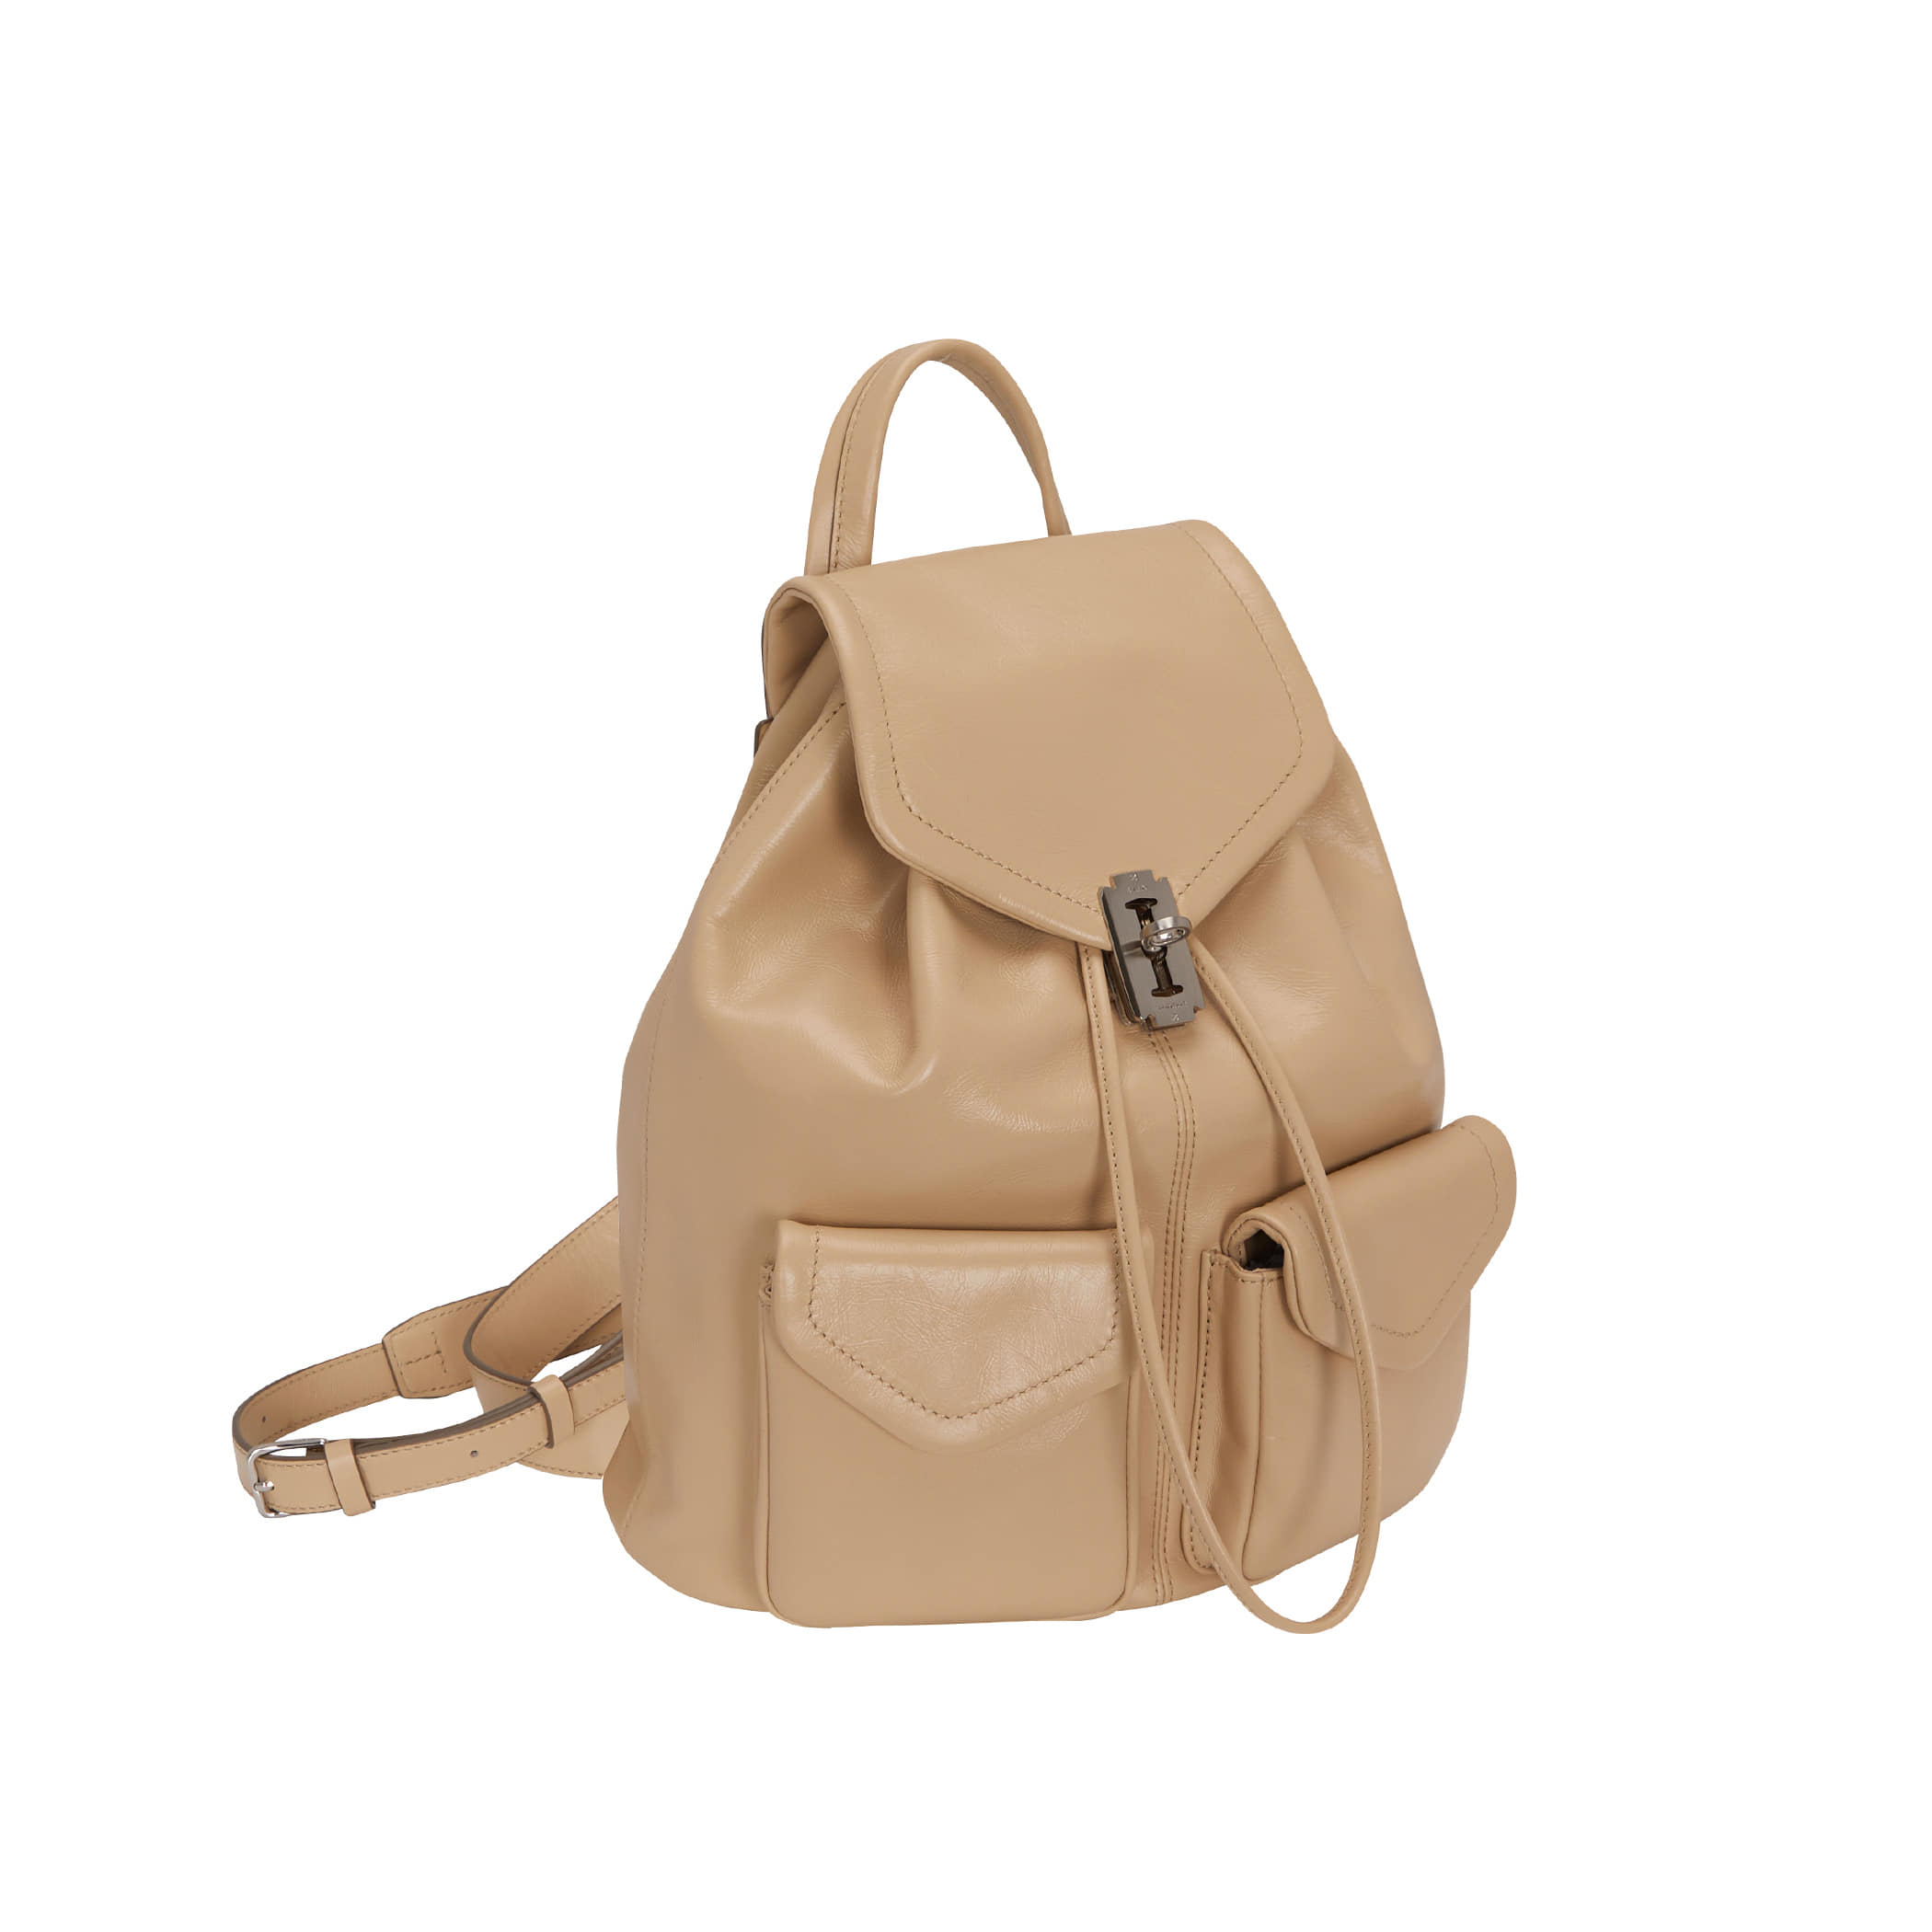 Occam Doux double pocket Backpack M (오캄 두 더블 포켓 백팩 미듐) Peanut Beige